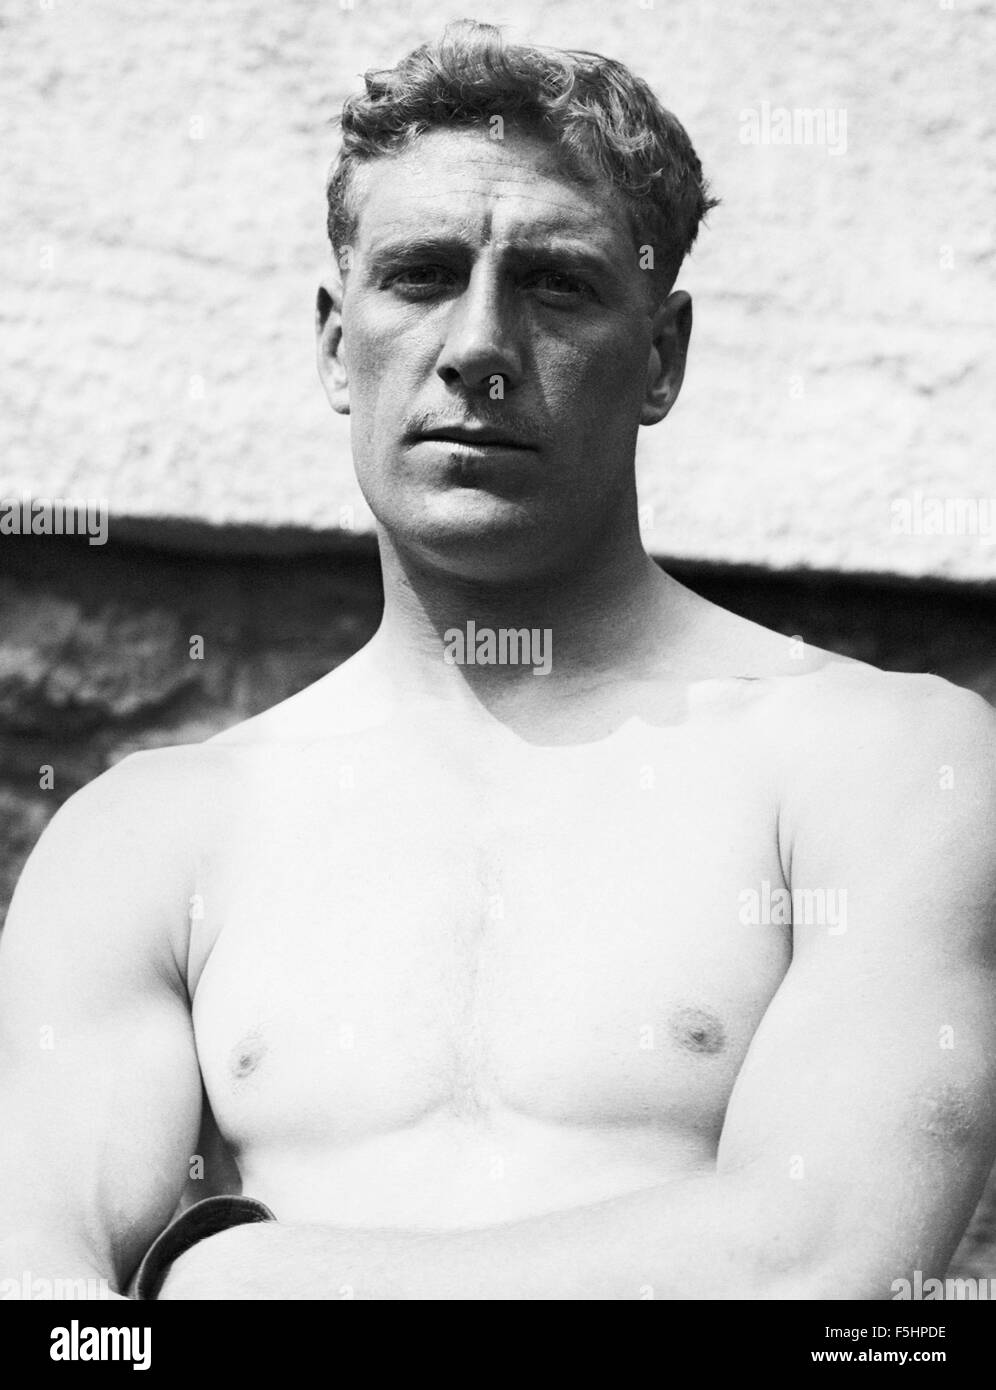 Vintage photo of English heavyweight boxer Bombardier Billy Wells (1889 - 1967). Wells, from the East End of London, was British and British Empire Heavyweight Champion from 1911 to 1919. He was also famous for being an early Rank 'gongman' - the person seen striking the large gong at the beginning of Rank Organisation films. Stock Photo